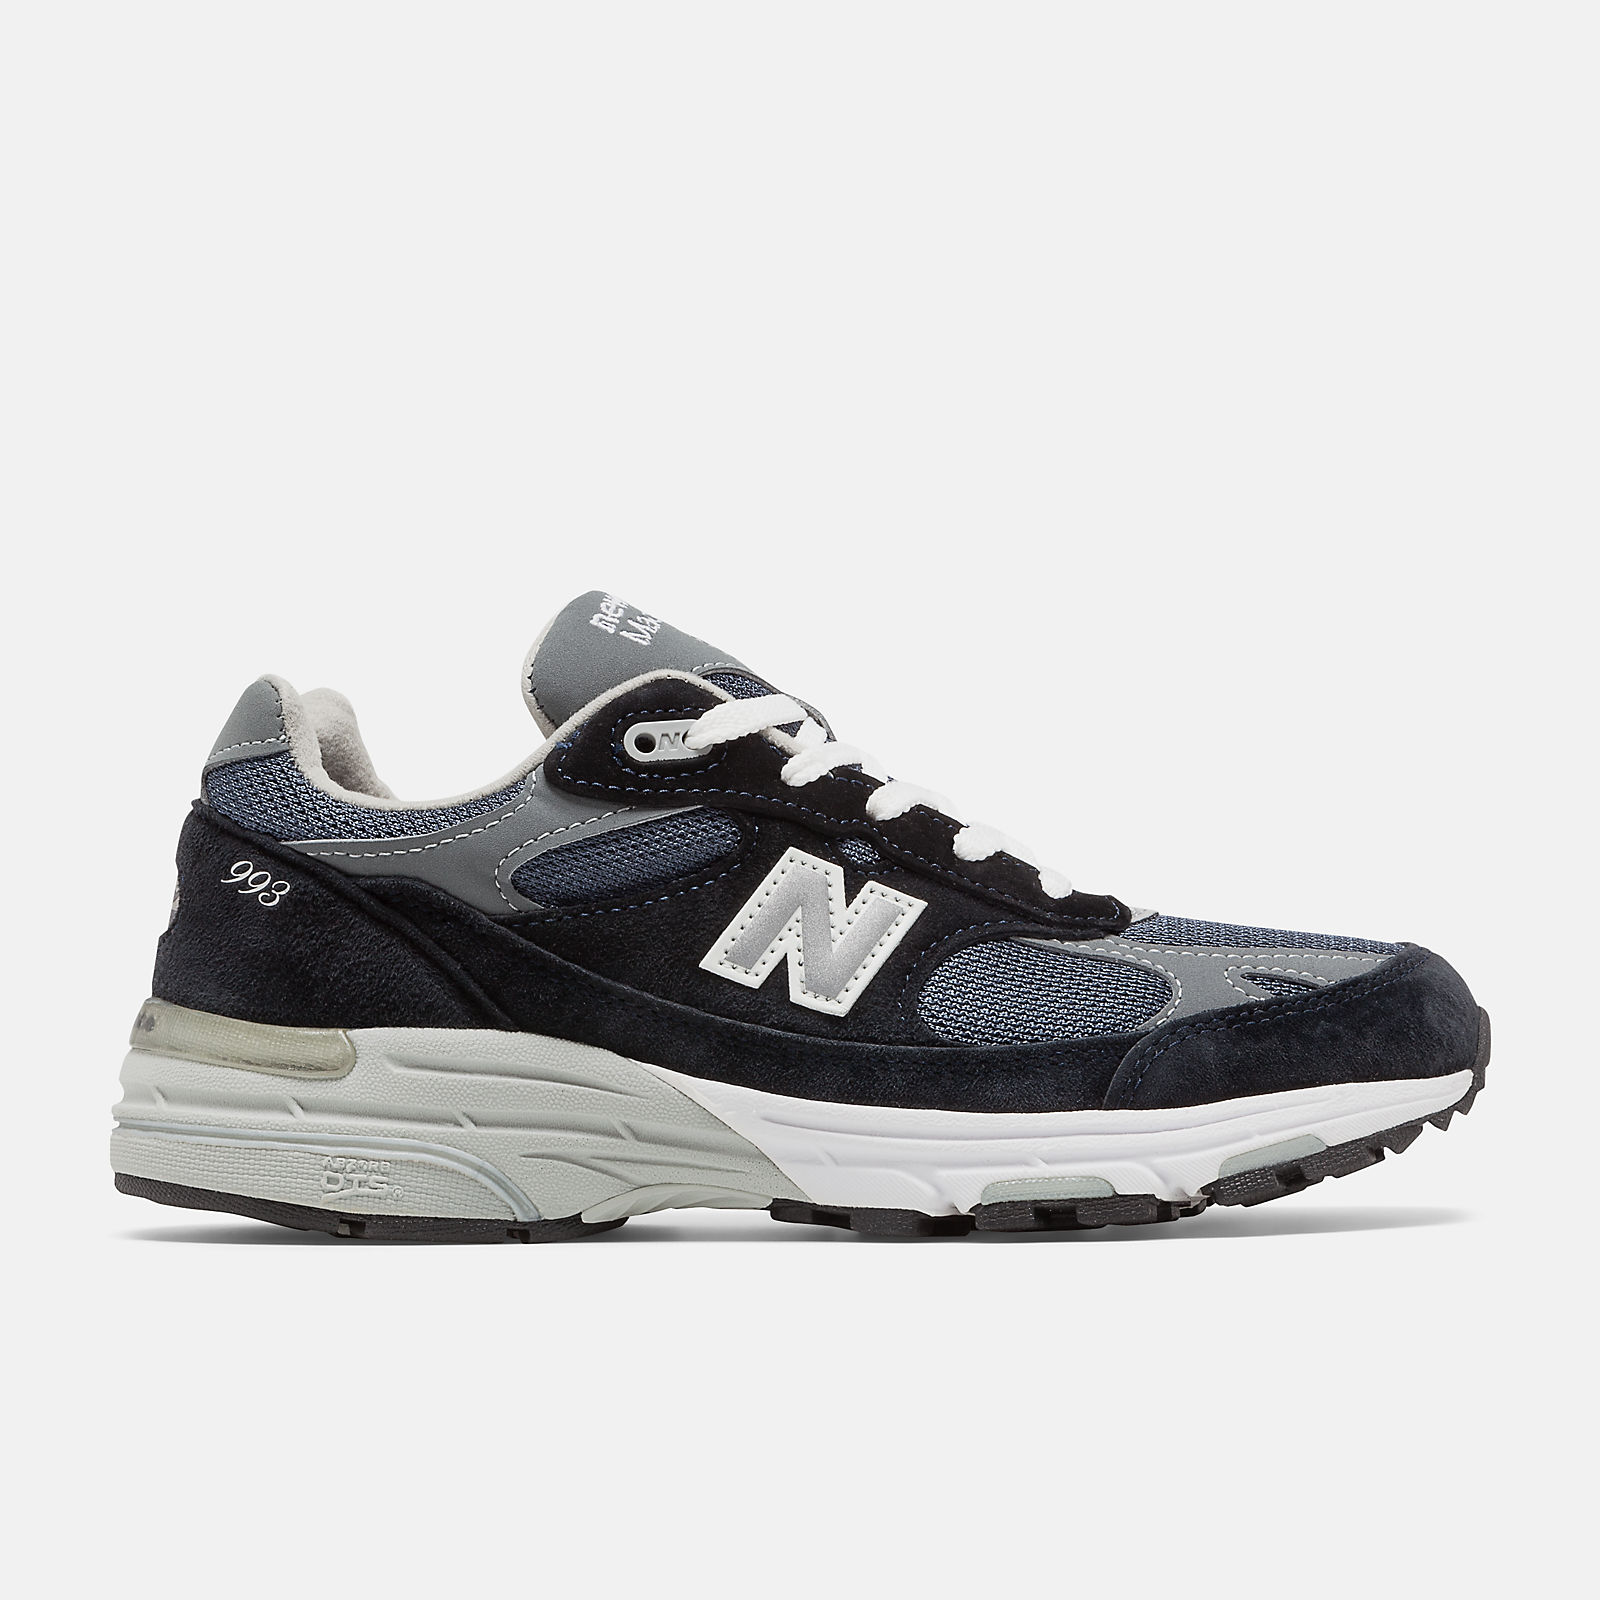 Womens Made in US 993 - New Balance